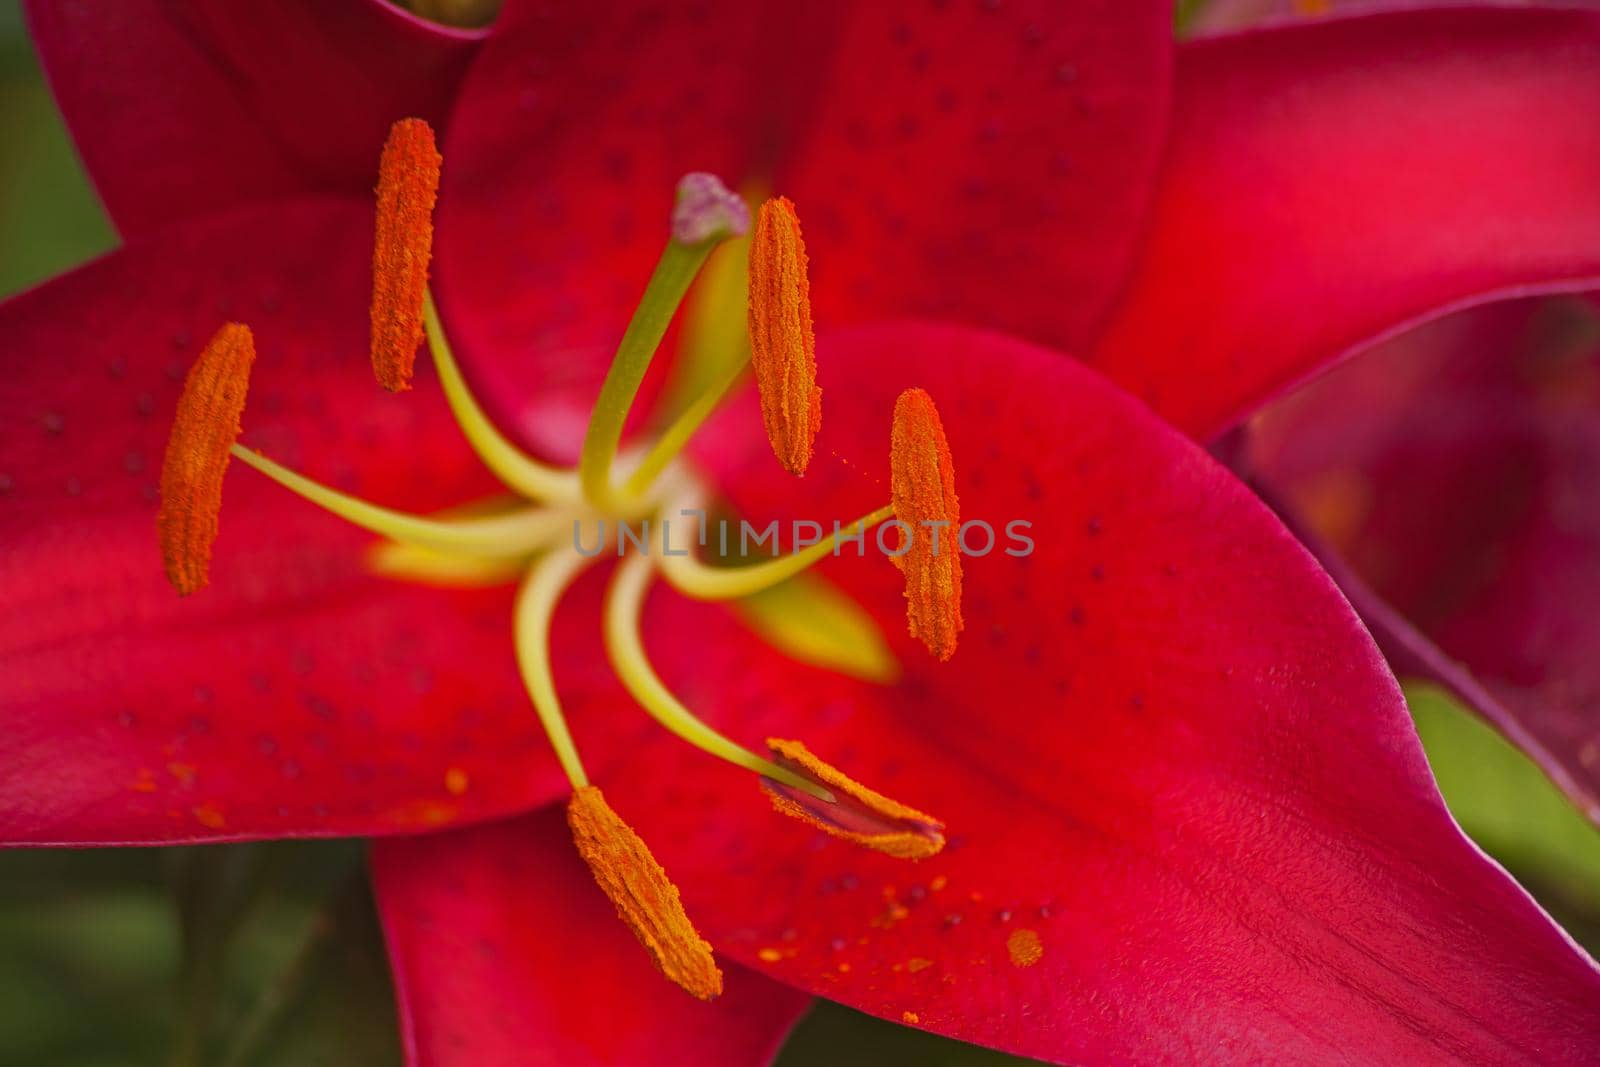 Red Oriental Lily 15267 by kobus_peche